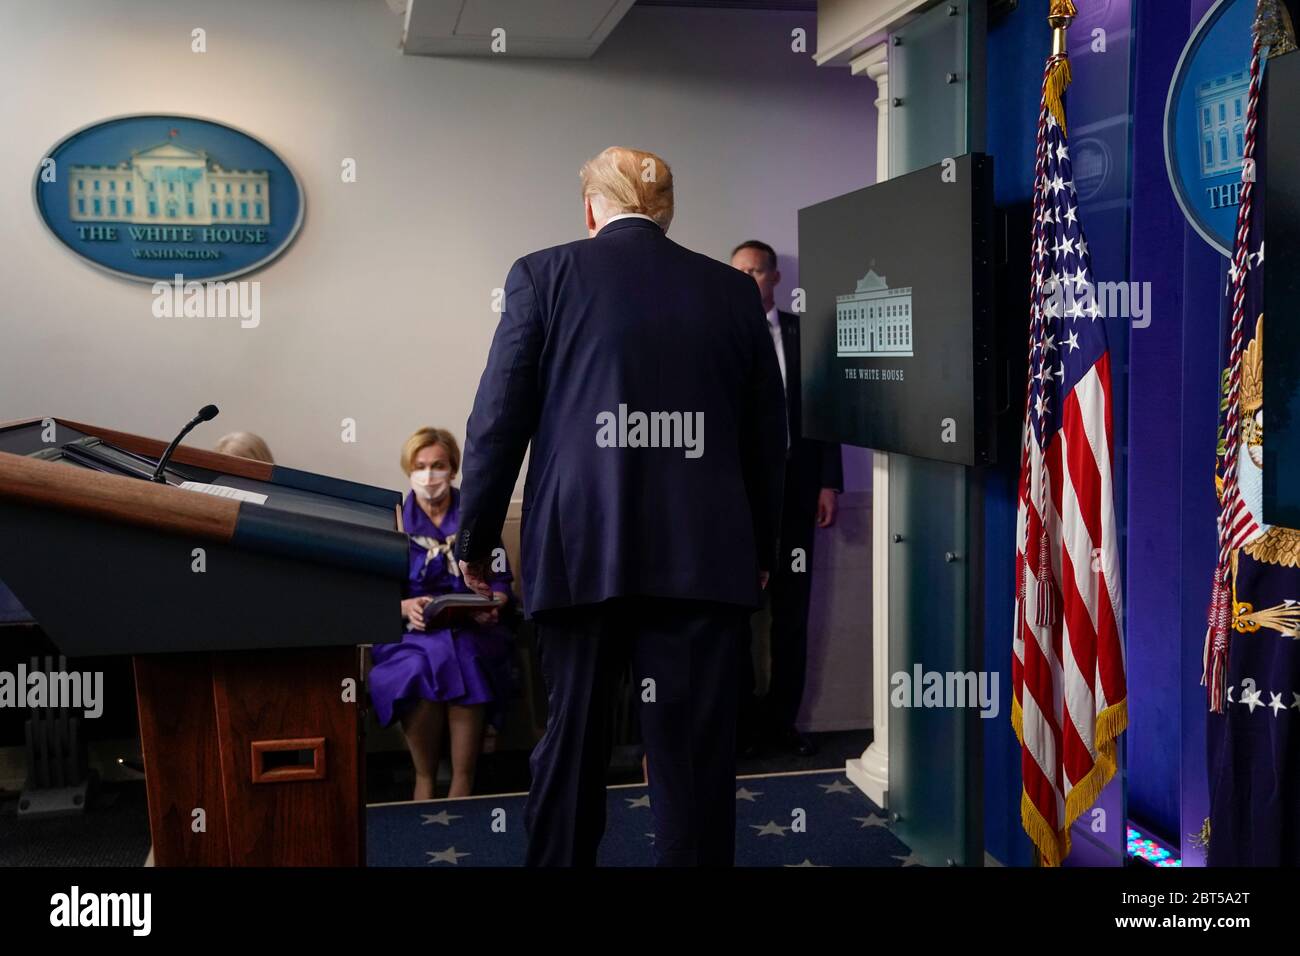 United States President Donald J. Trump leaves a news conference in the Brady Press Briefing Room of the White House in Washington, DC, U.S., on Friday, May 22, 2020. Trump didn't wear a face mask during most of his tour of Ford Motor Co.'s ventilator facility Thursday, defying the automaker's policies and seeking to portray an image of normalcy even as American coronavirus deaths approach 100,000. Credit: Andrew Harrer/Pool via CNP/MediaPunch Stock Photo